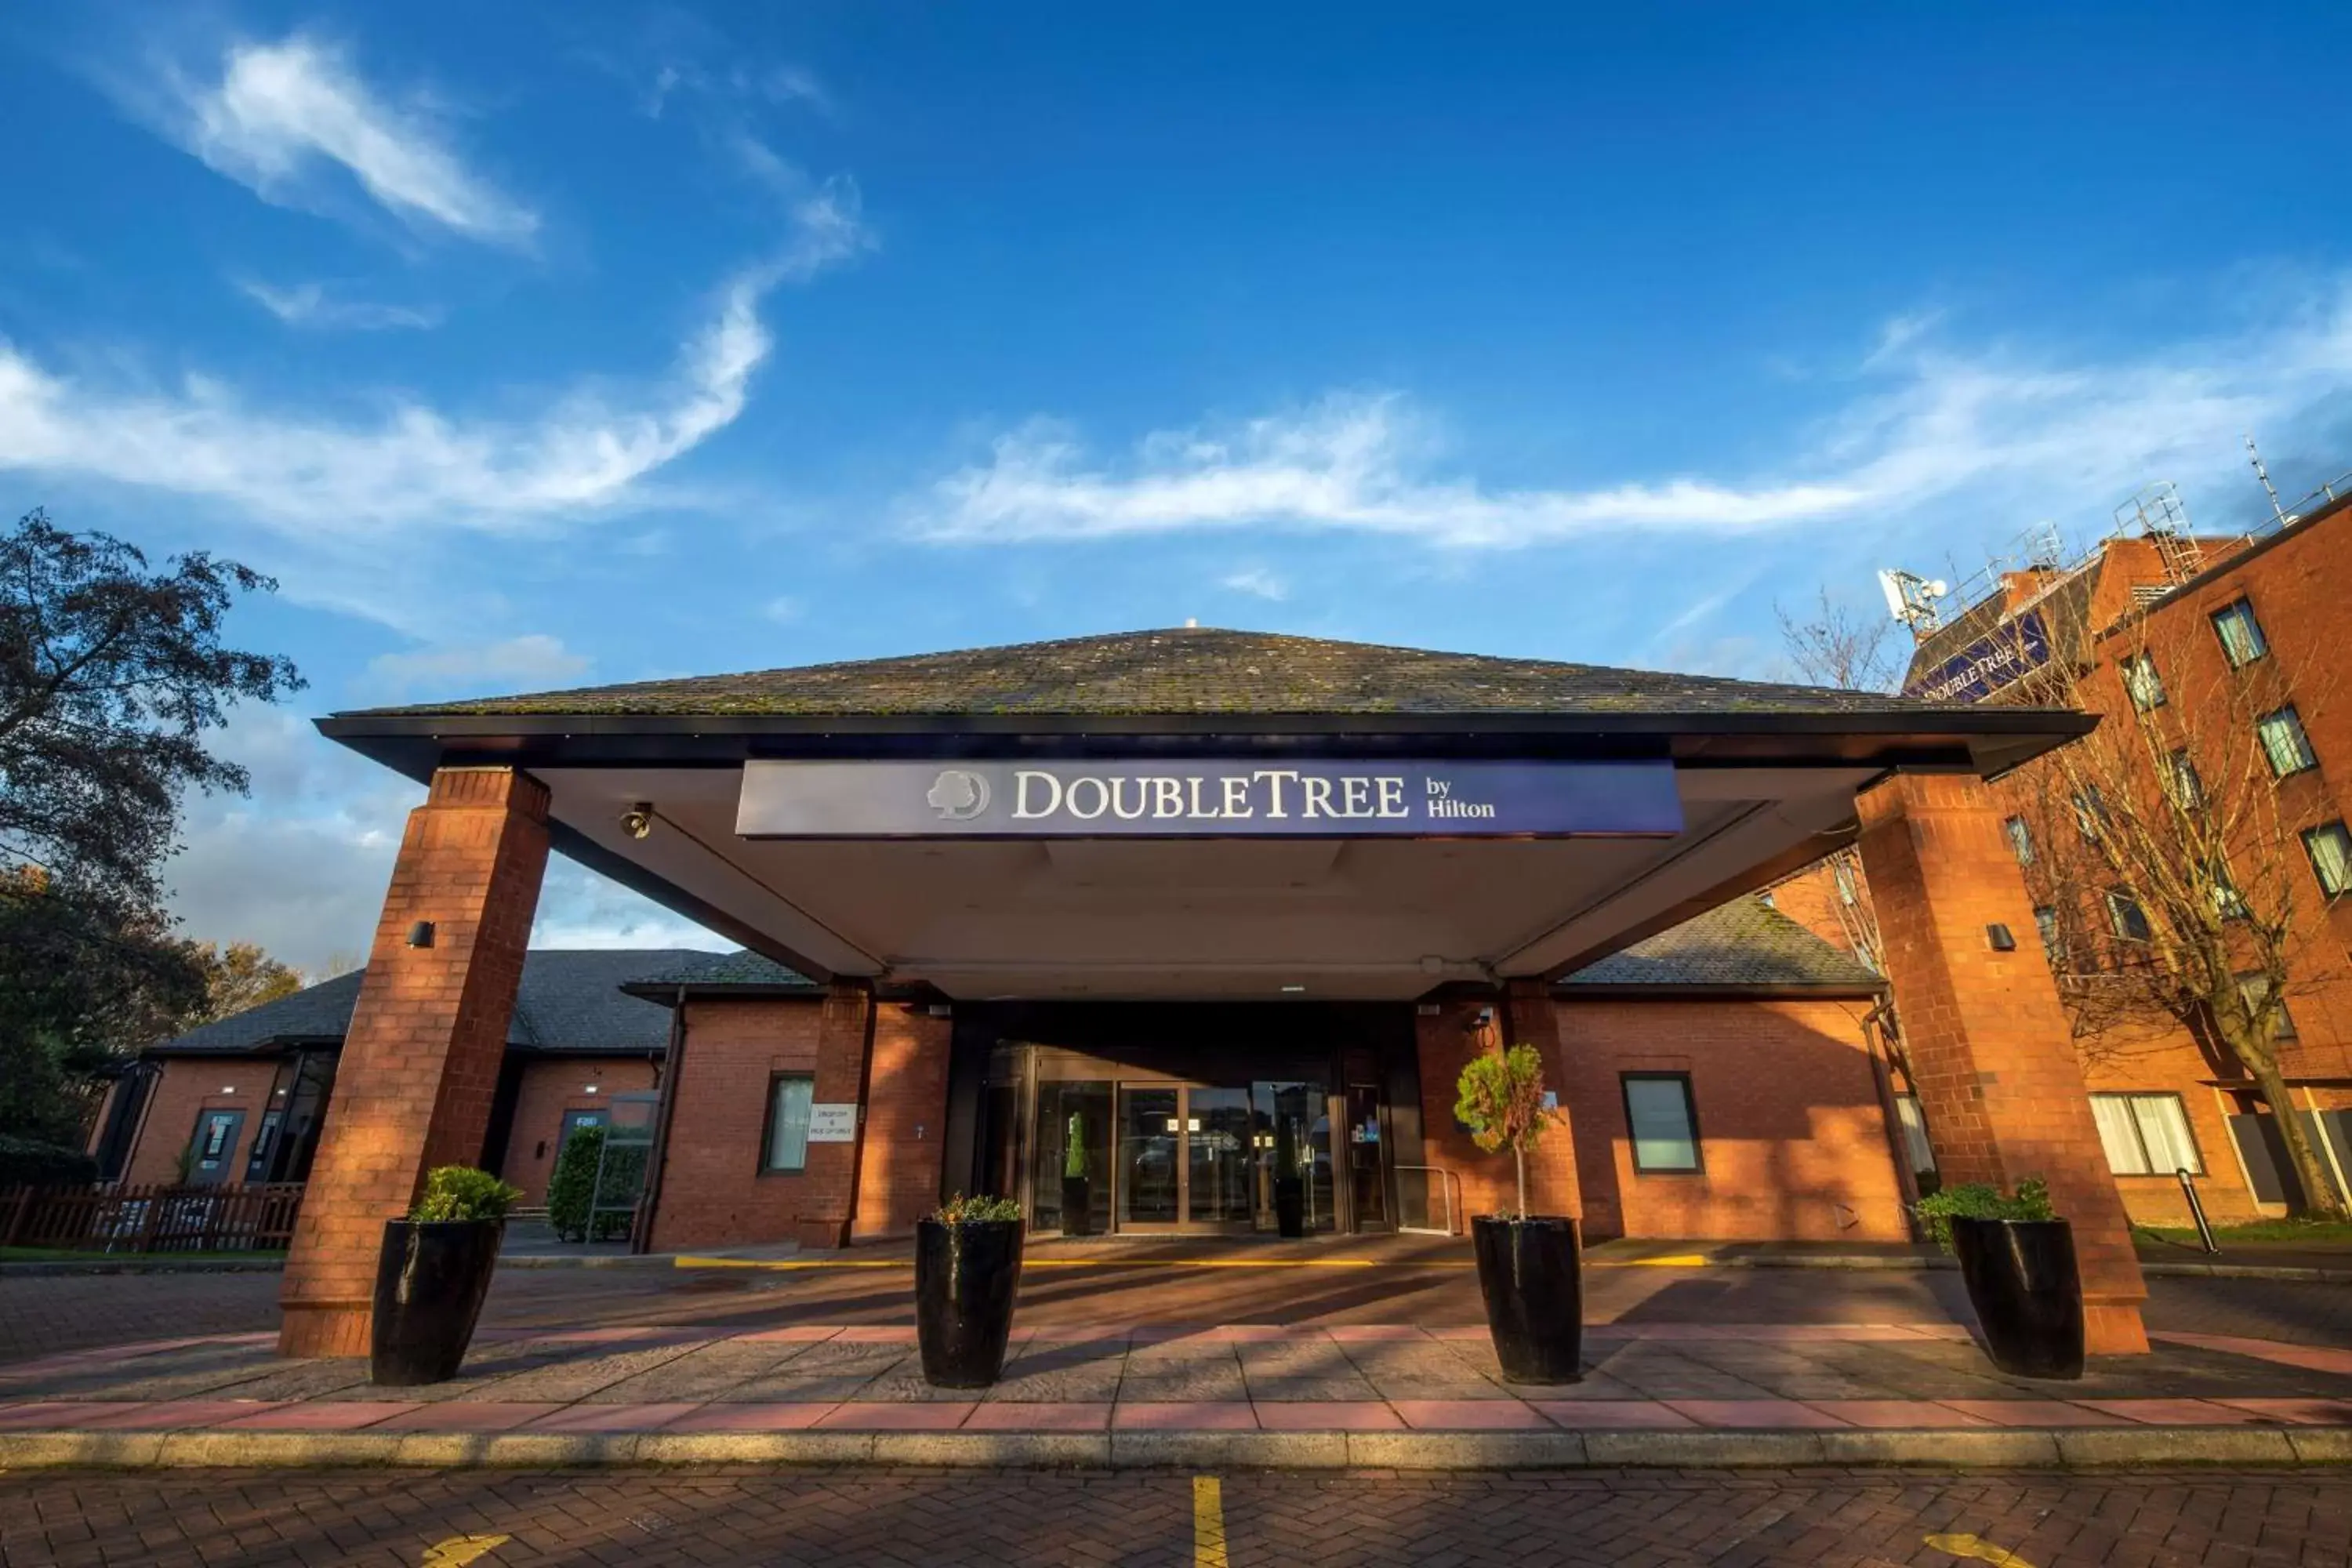 Property building in DoubleTree by Hilton Manchester Airport